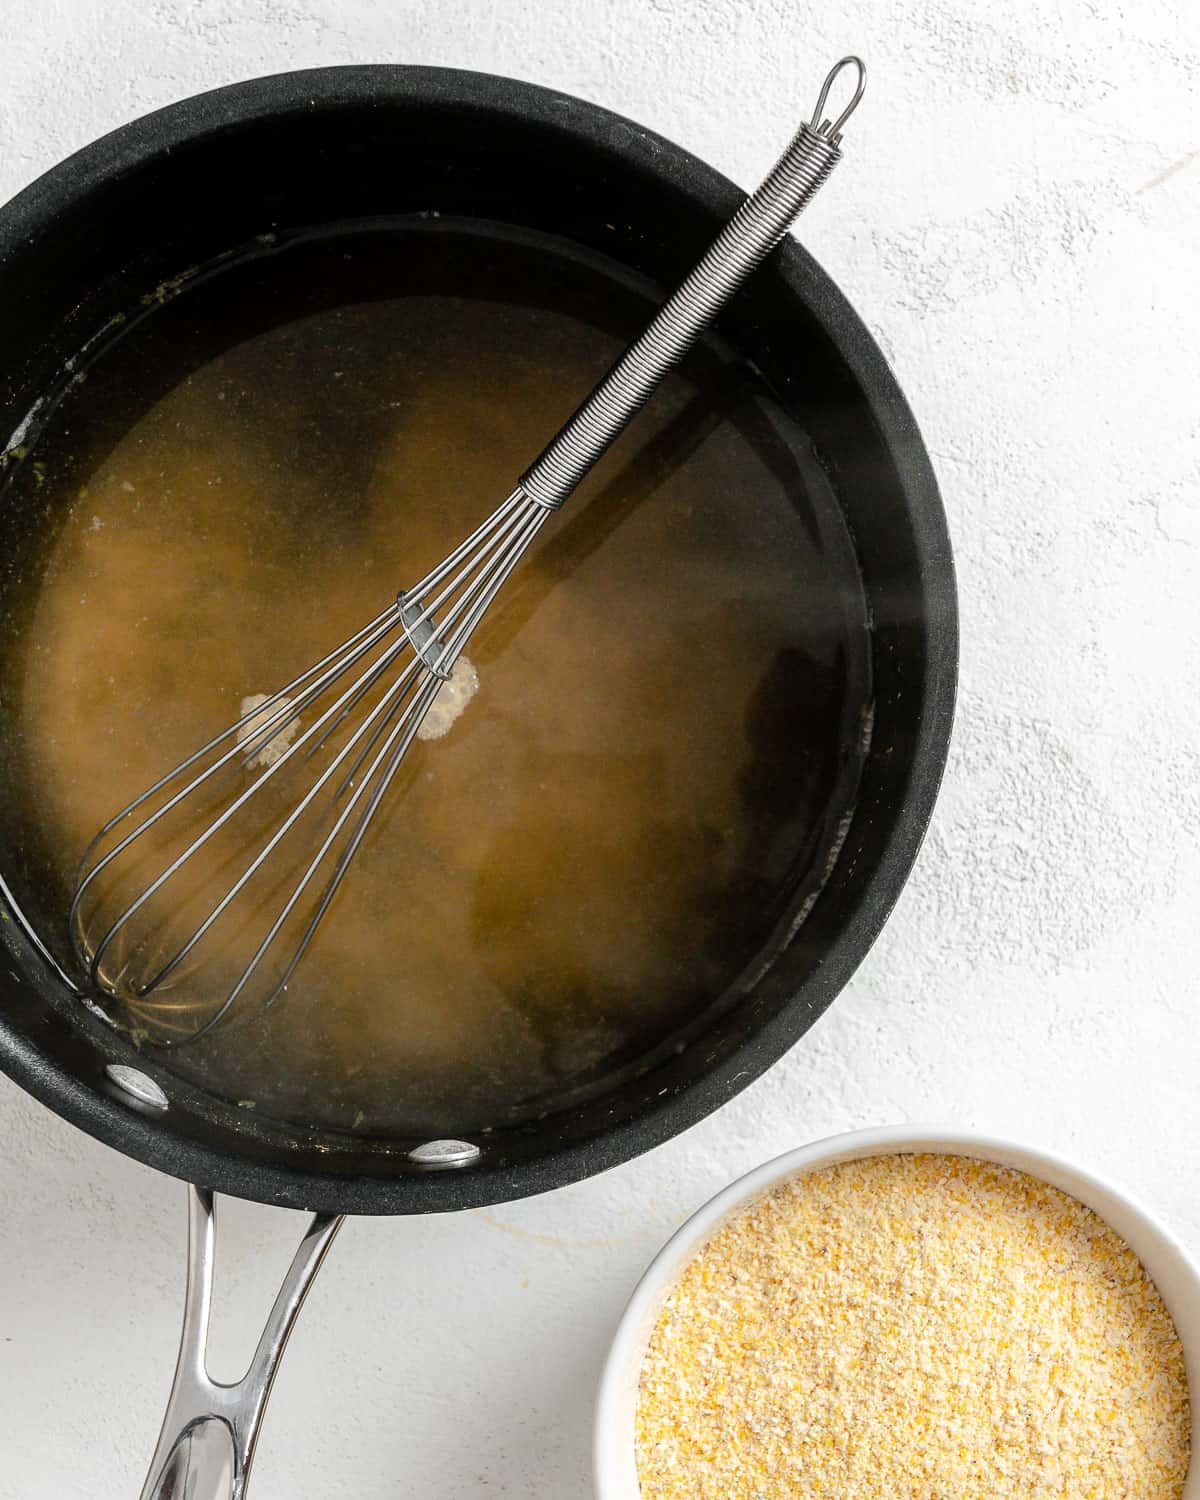 process shot of mixing cornmeal in pot against white surface